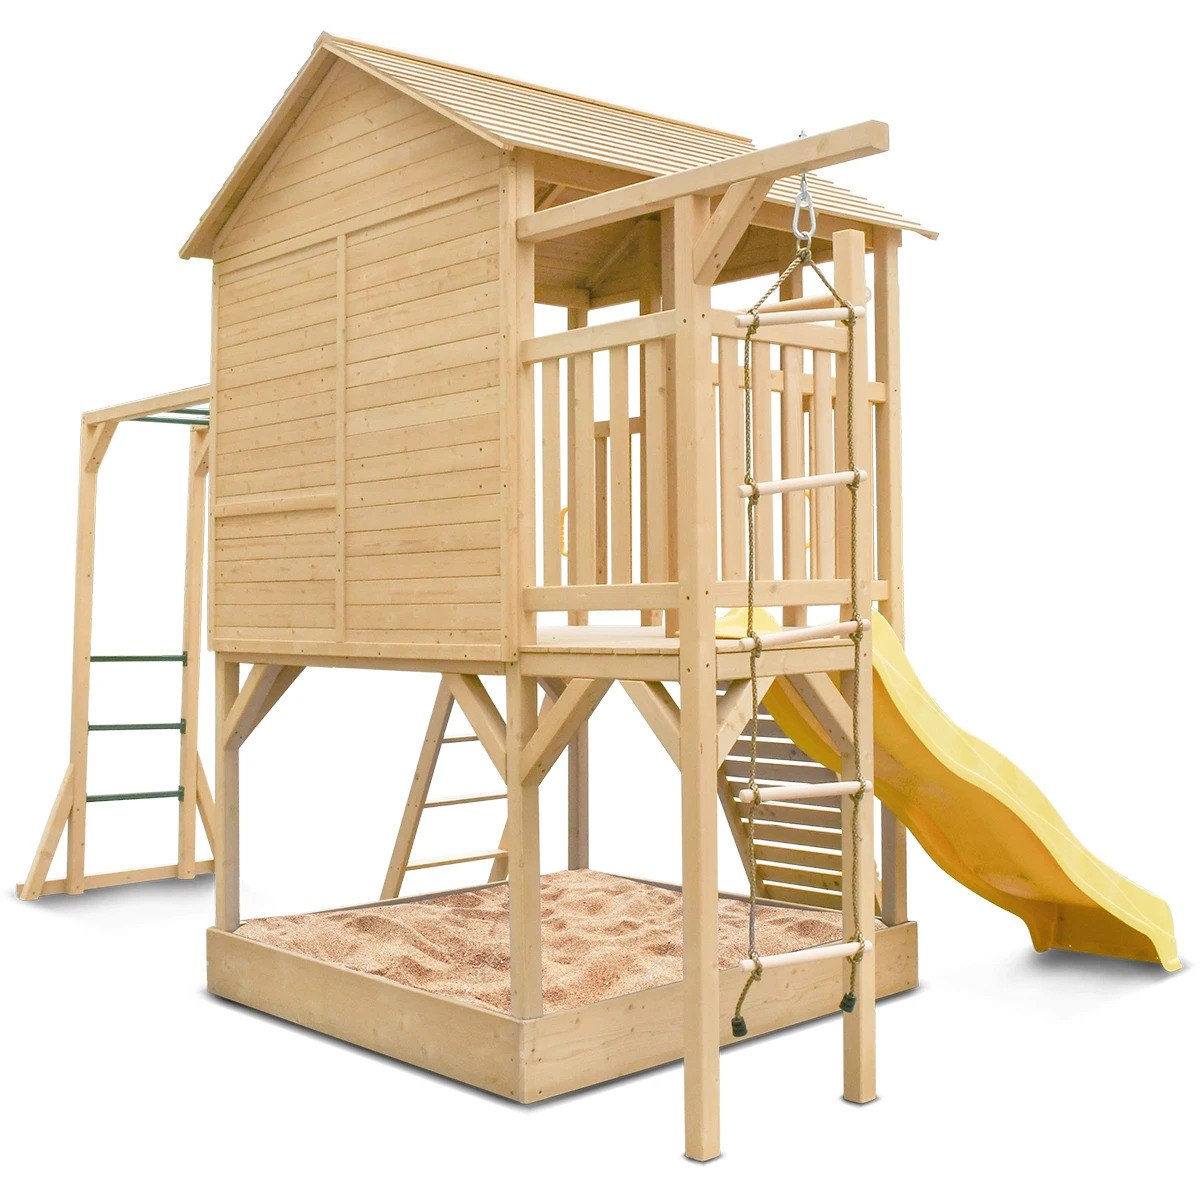 Lifespan Kids Kingston Cubby House with Slide